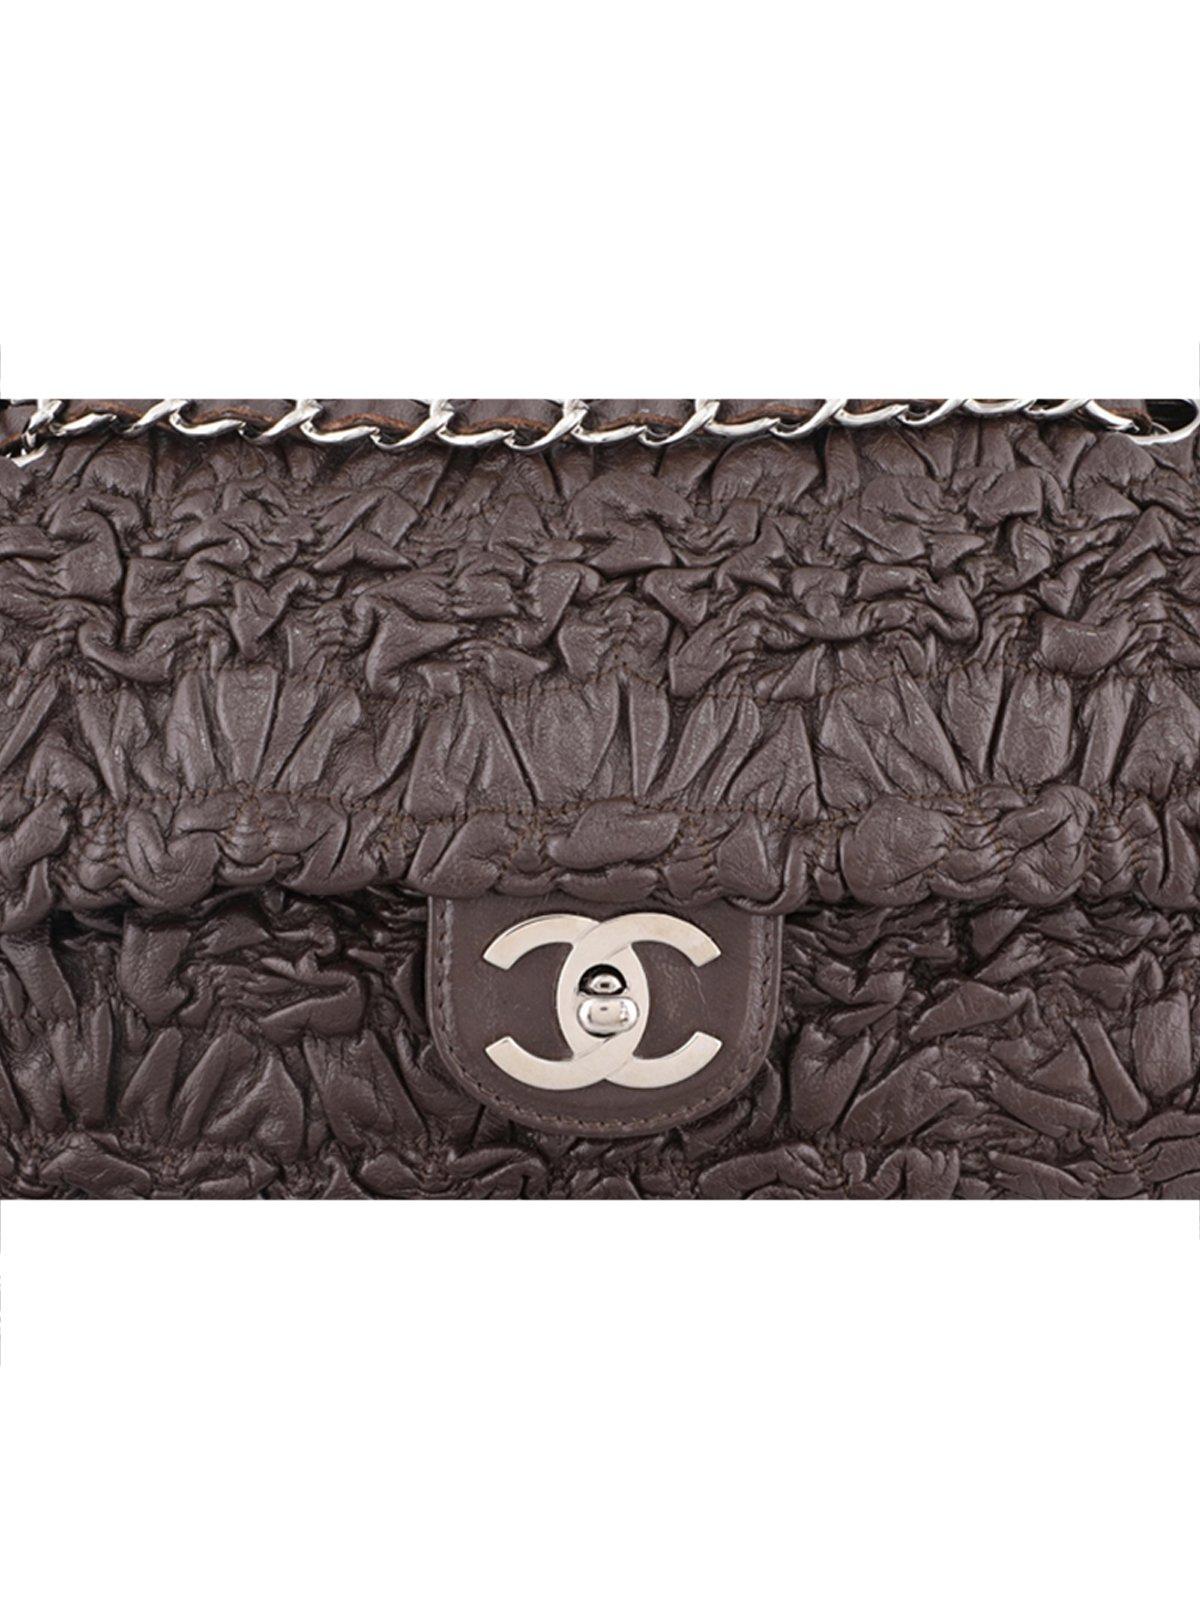 Black Chanel Fall 2007 Ruched Wrinkled Brown Leather Medium Classic Flap Bag  For Sale